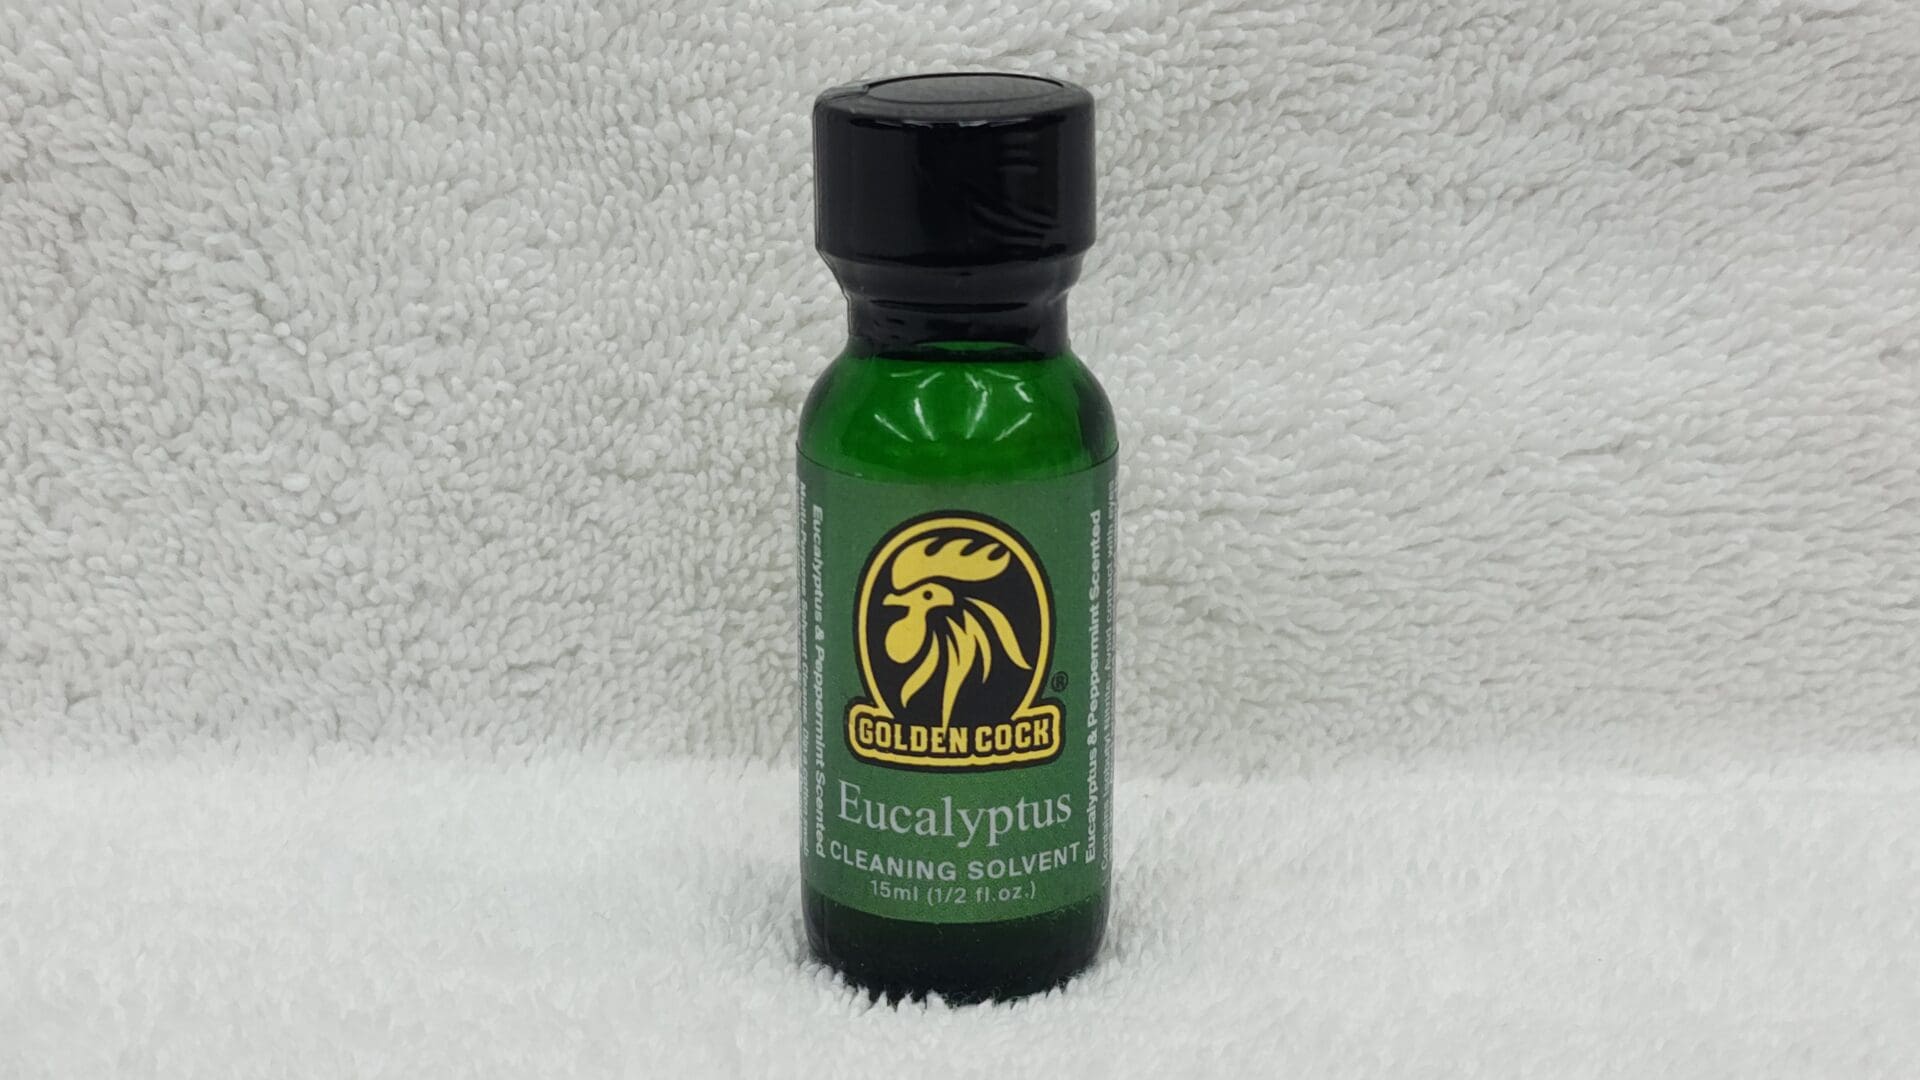 A small bottle of Golden Cock Eucalyptus cleaning solvent on a white towel.